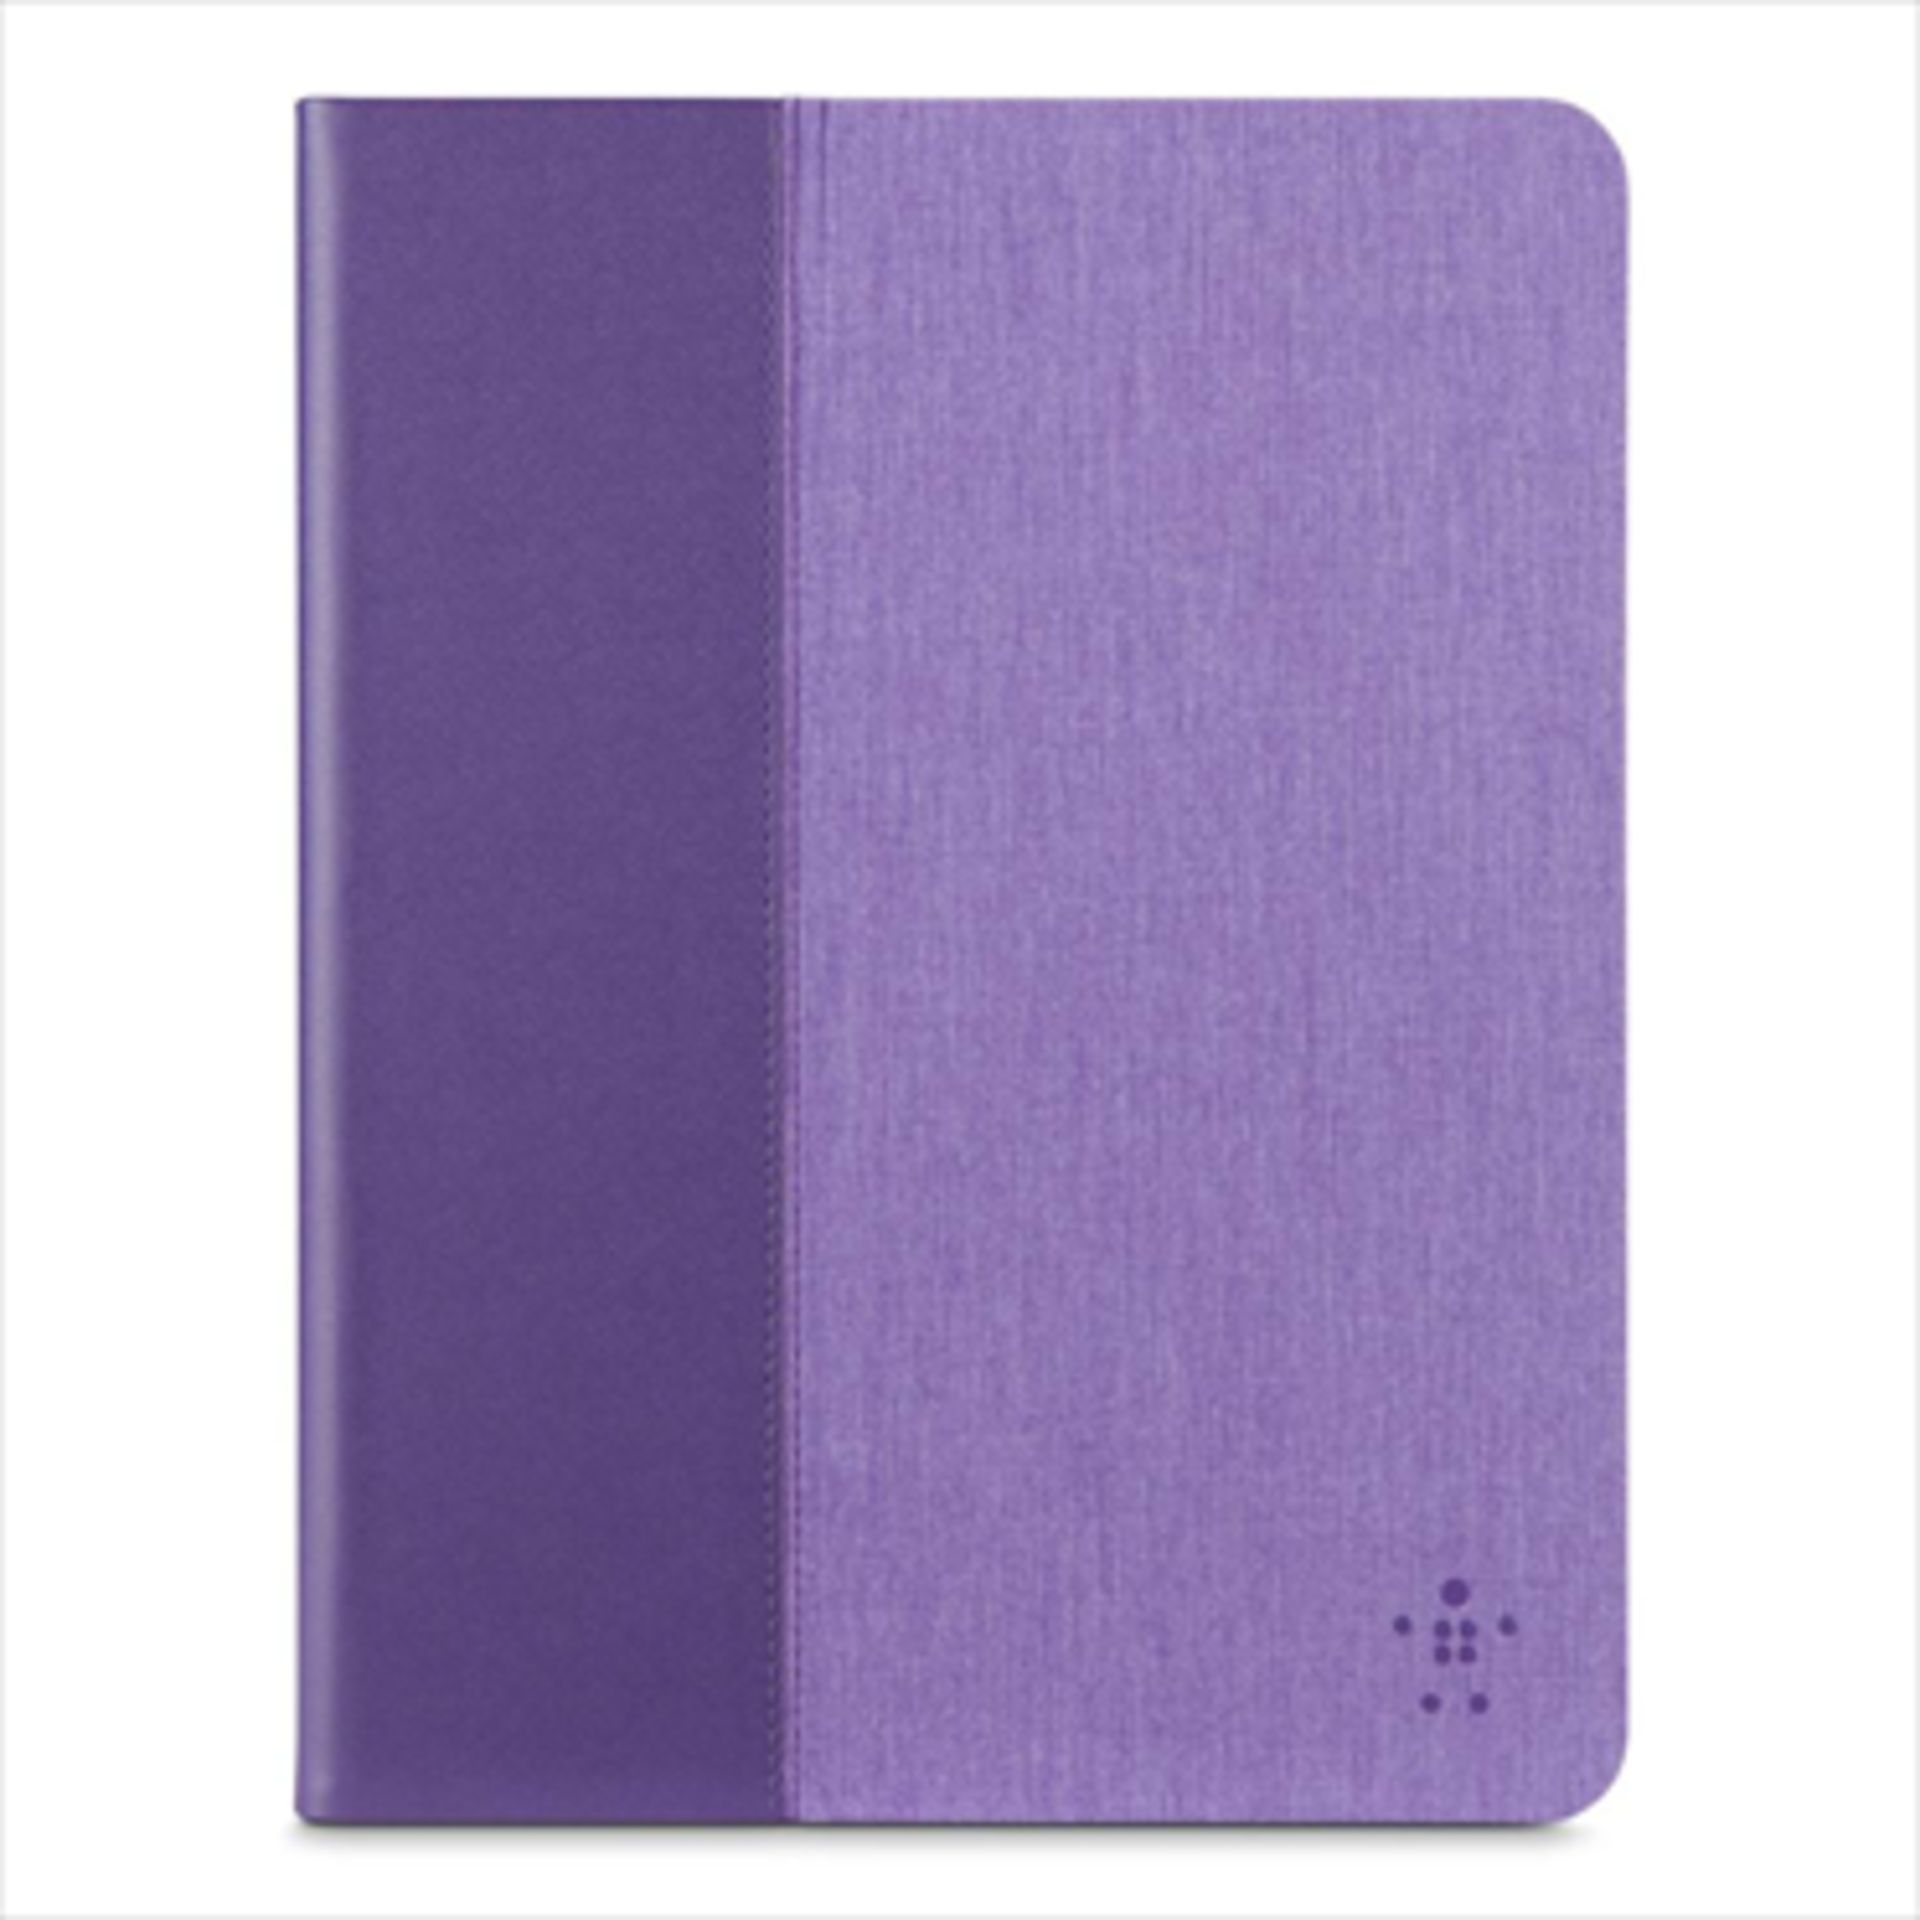 V Brand New Belkin Purple Chambray Cover For iPad Air & iPad Air 2 - Slim Design - Made For